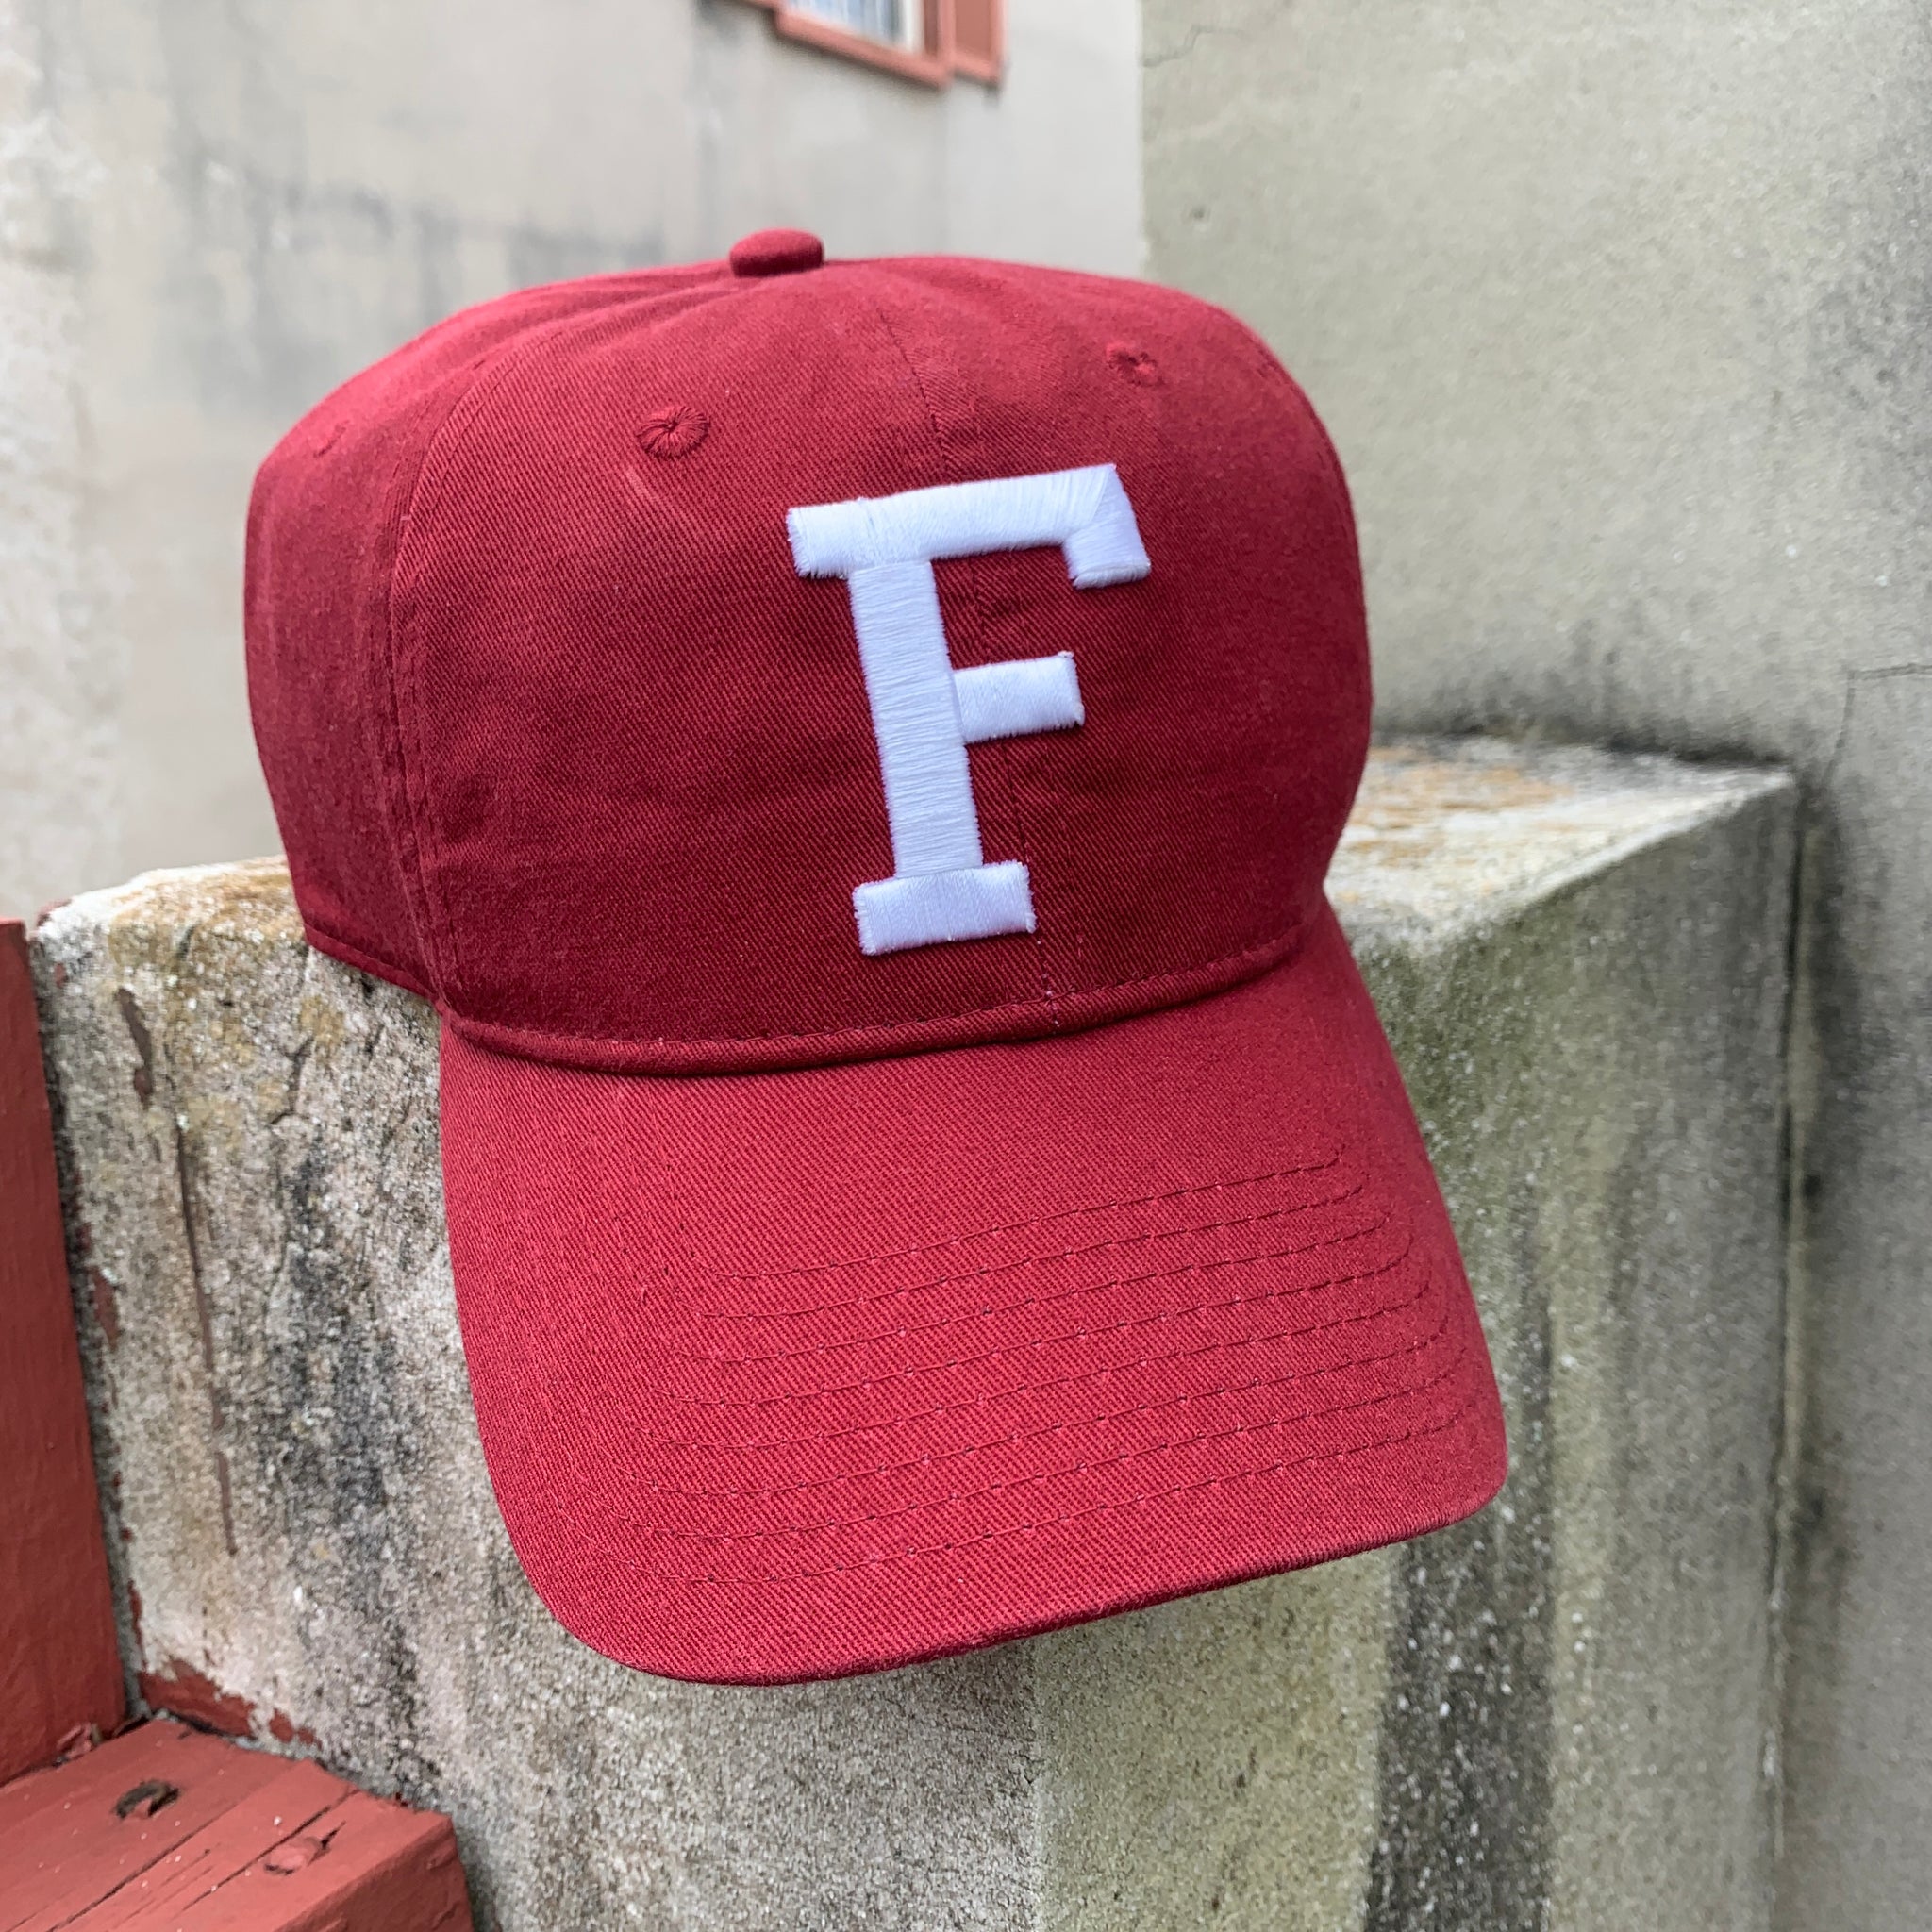 Crimson red hat with white F in center